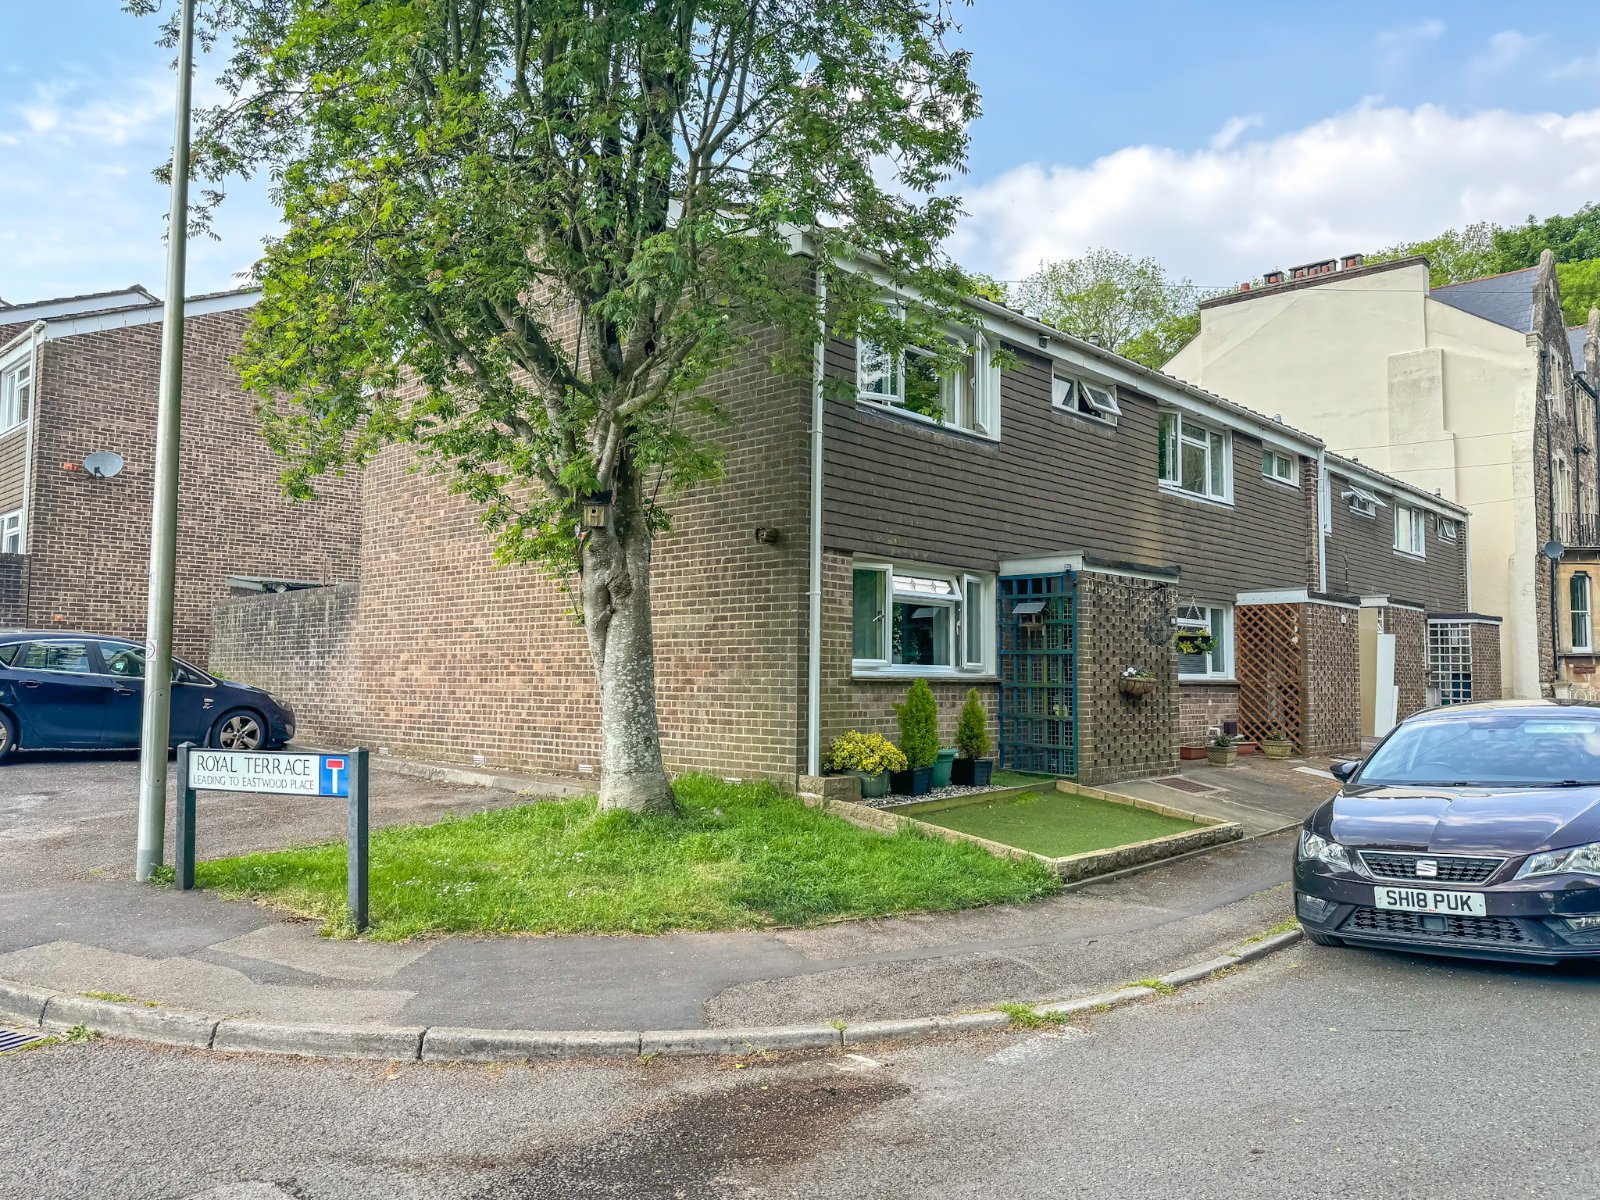 Leigh View Road, Portishead, Bristol, Somerset, BS20